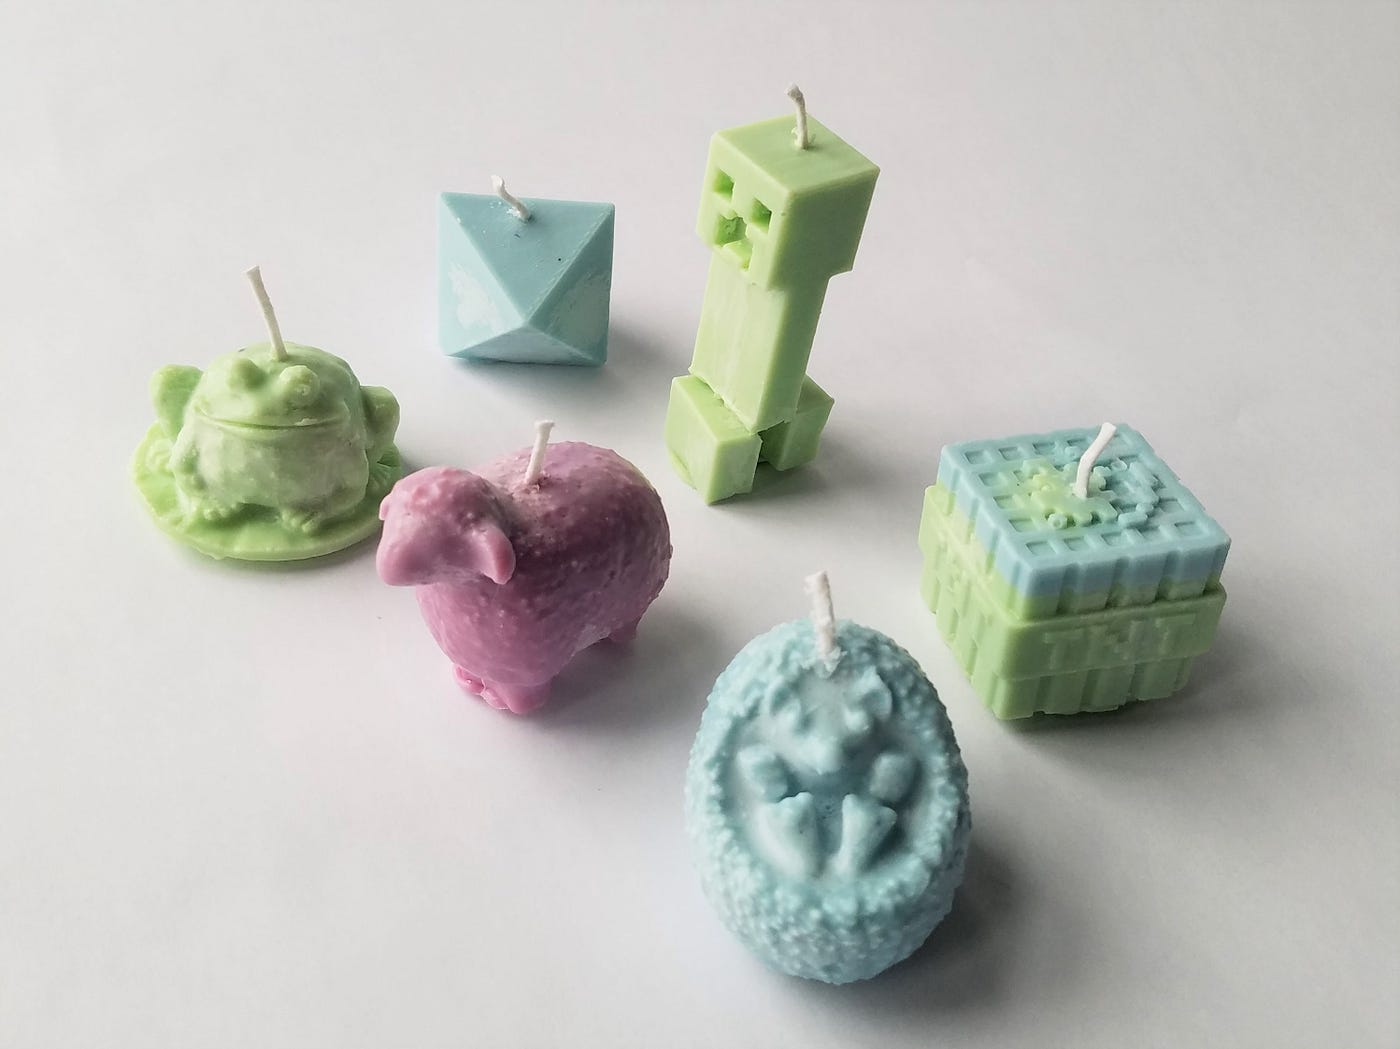 How to Make a Silicone Mold & Candle, by Jess